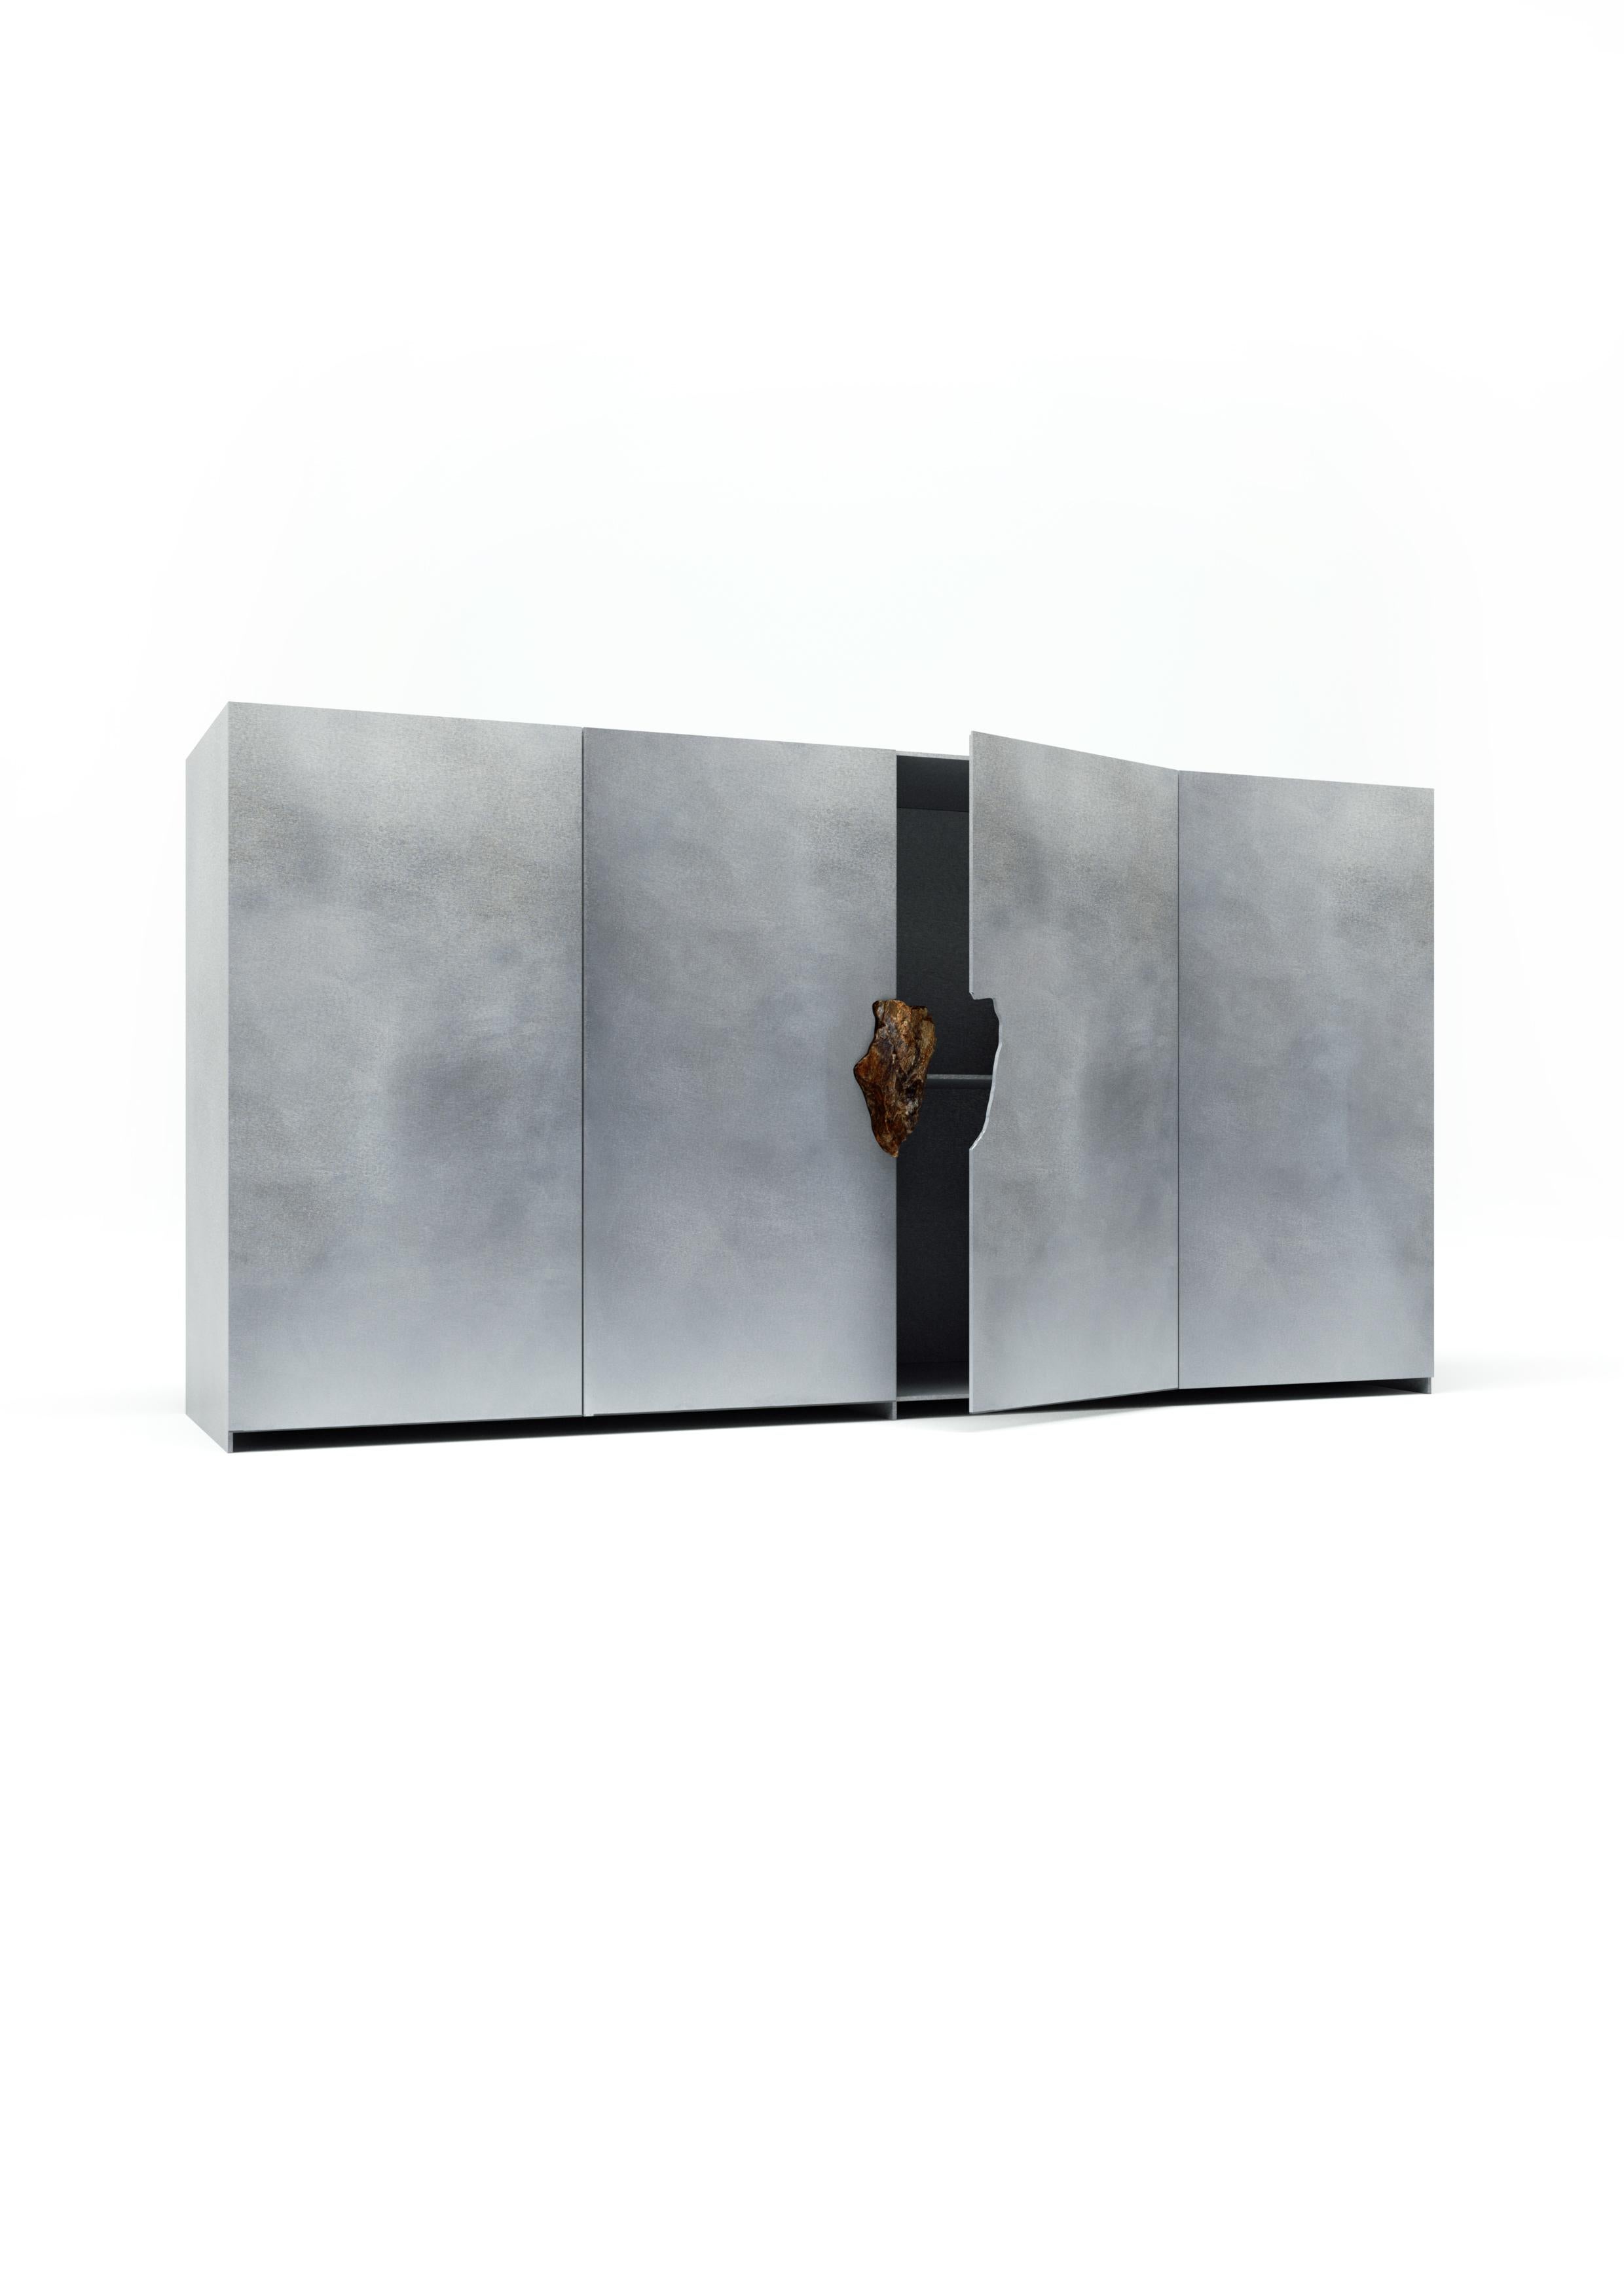 Belgian Oxidized and Waxed Aluminium Big Cabinet with Petrified Wood by Pierre De Valck For Sale